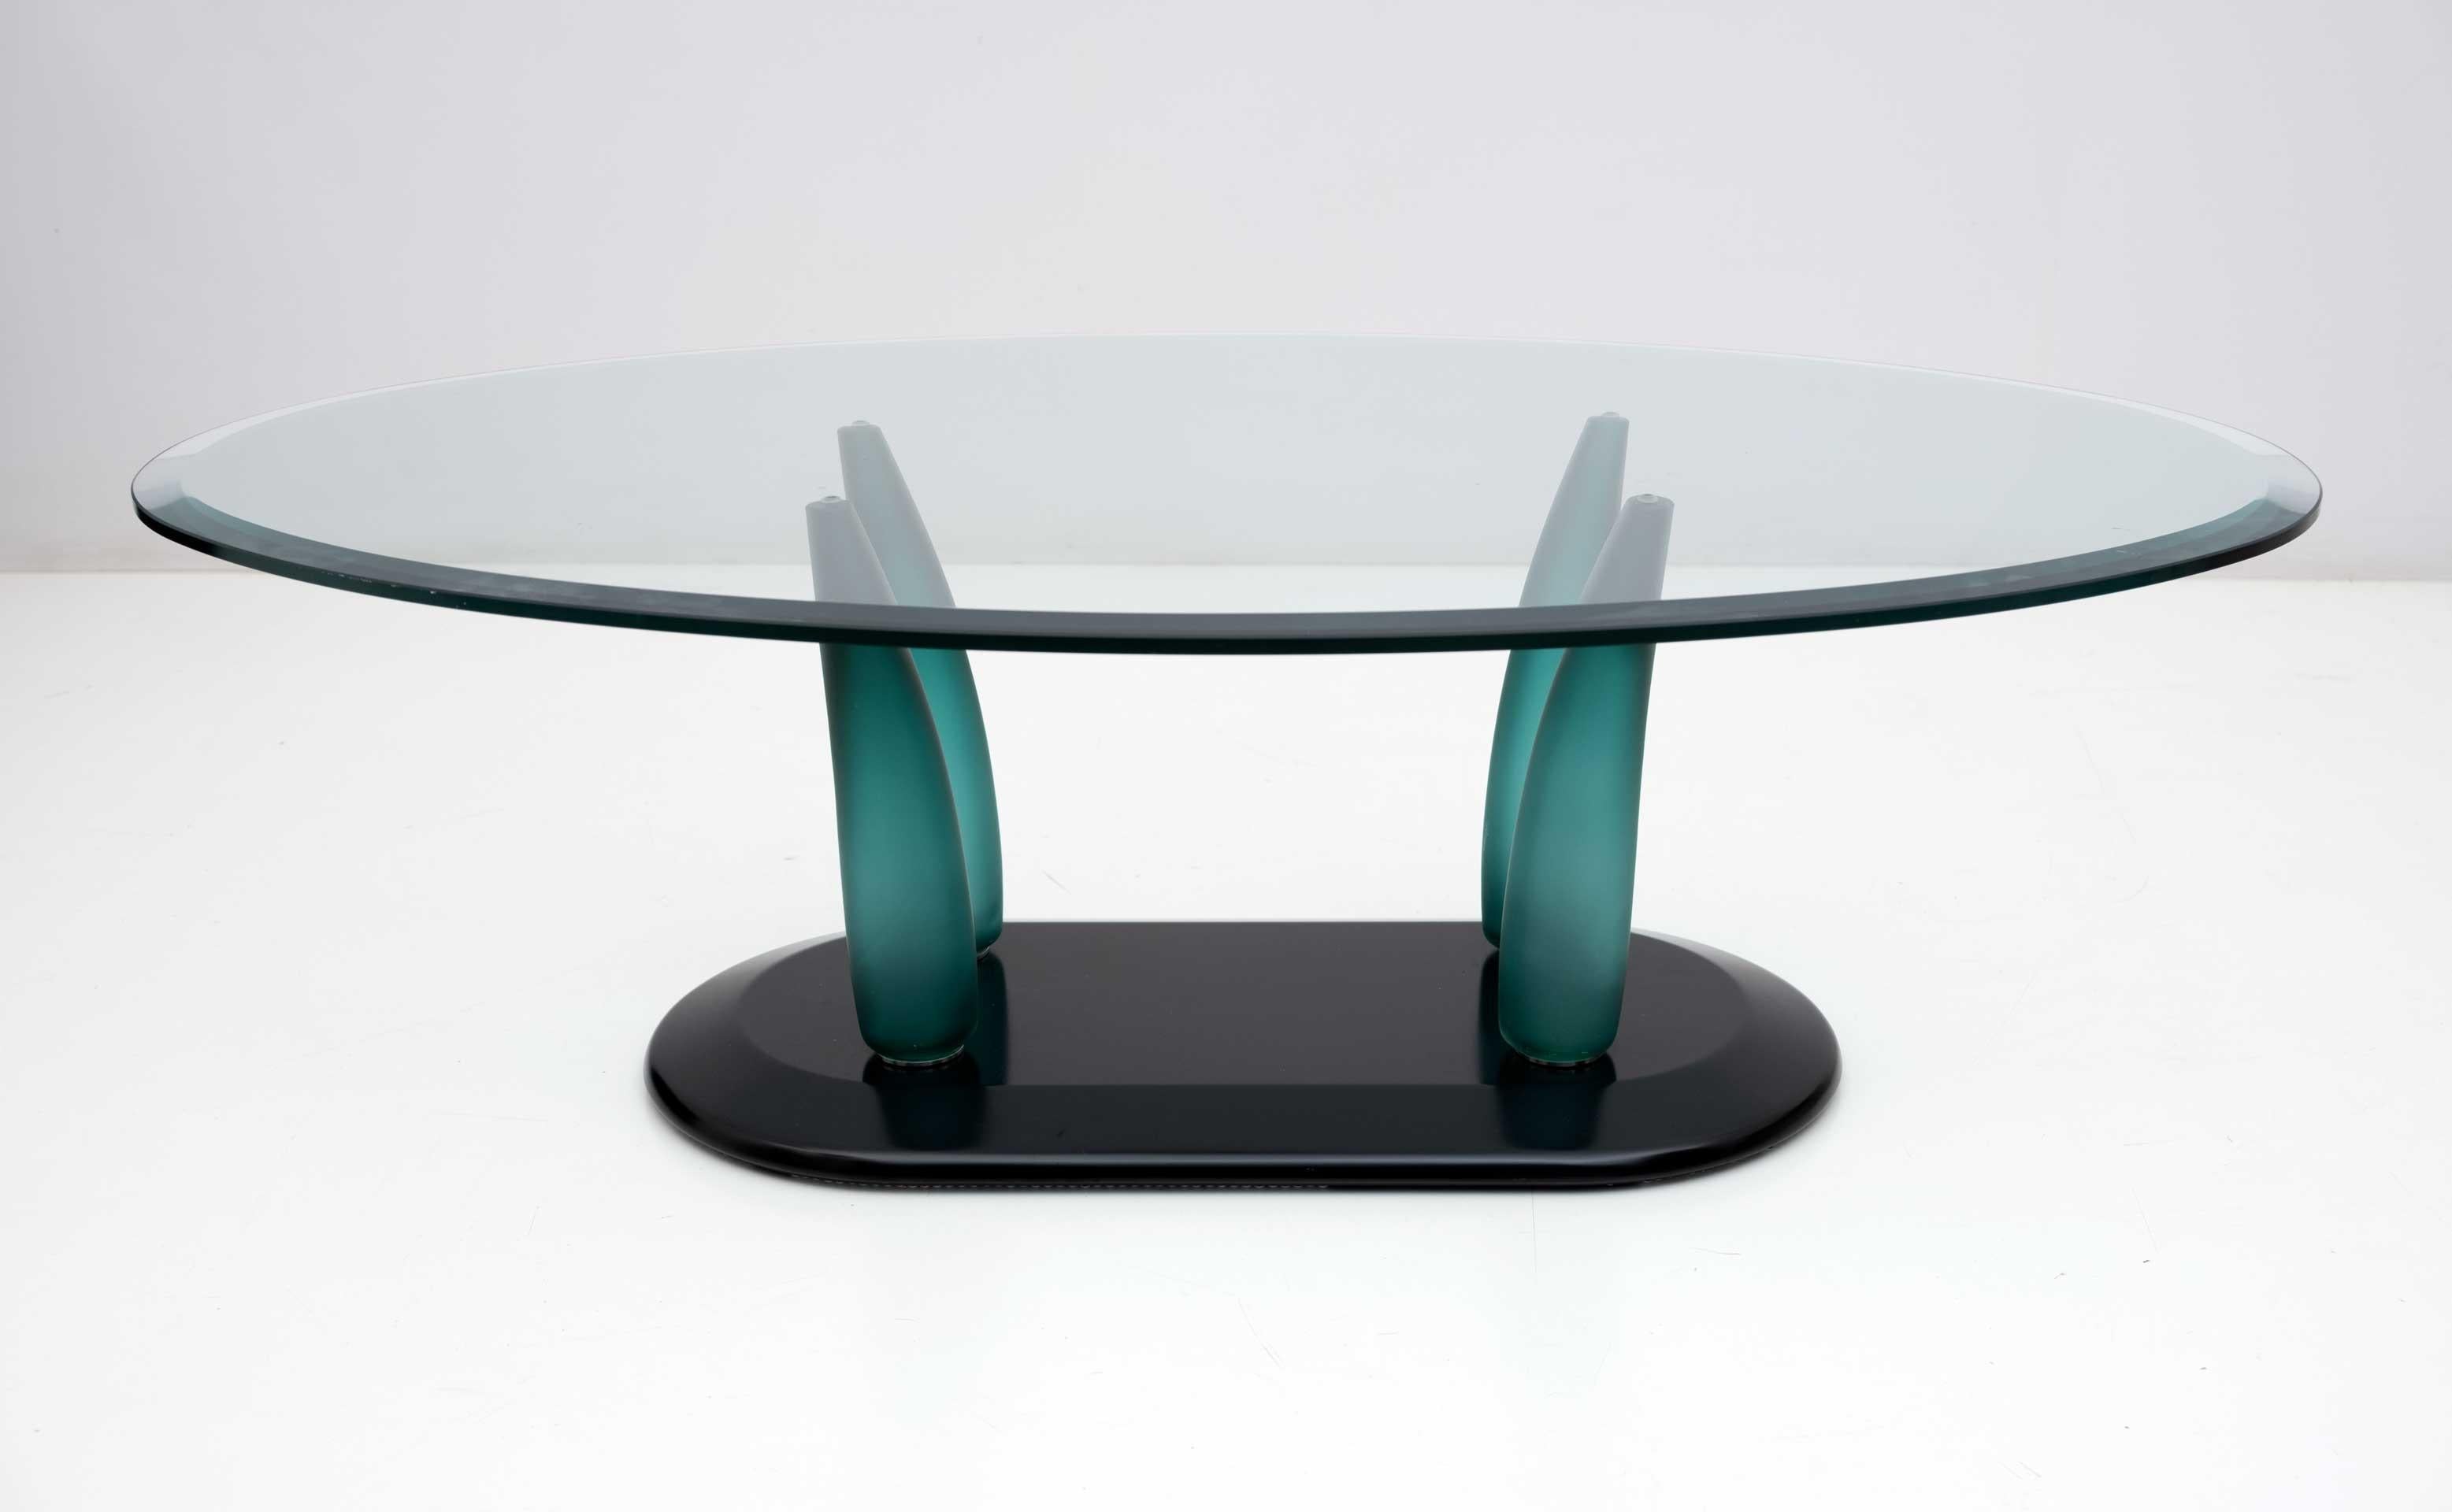 Coffee table with base in black lacquered wood, legs in teal blown glass and top in oval shaped and ground glass, Seguso Murano manufacture, 1980s